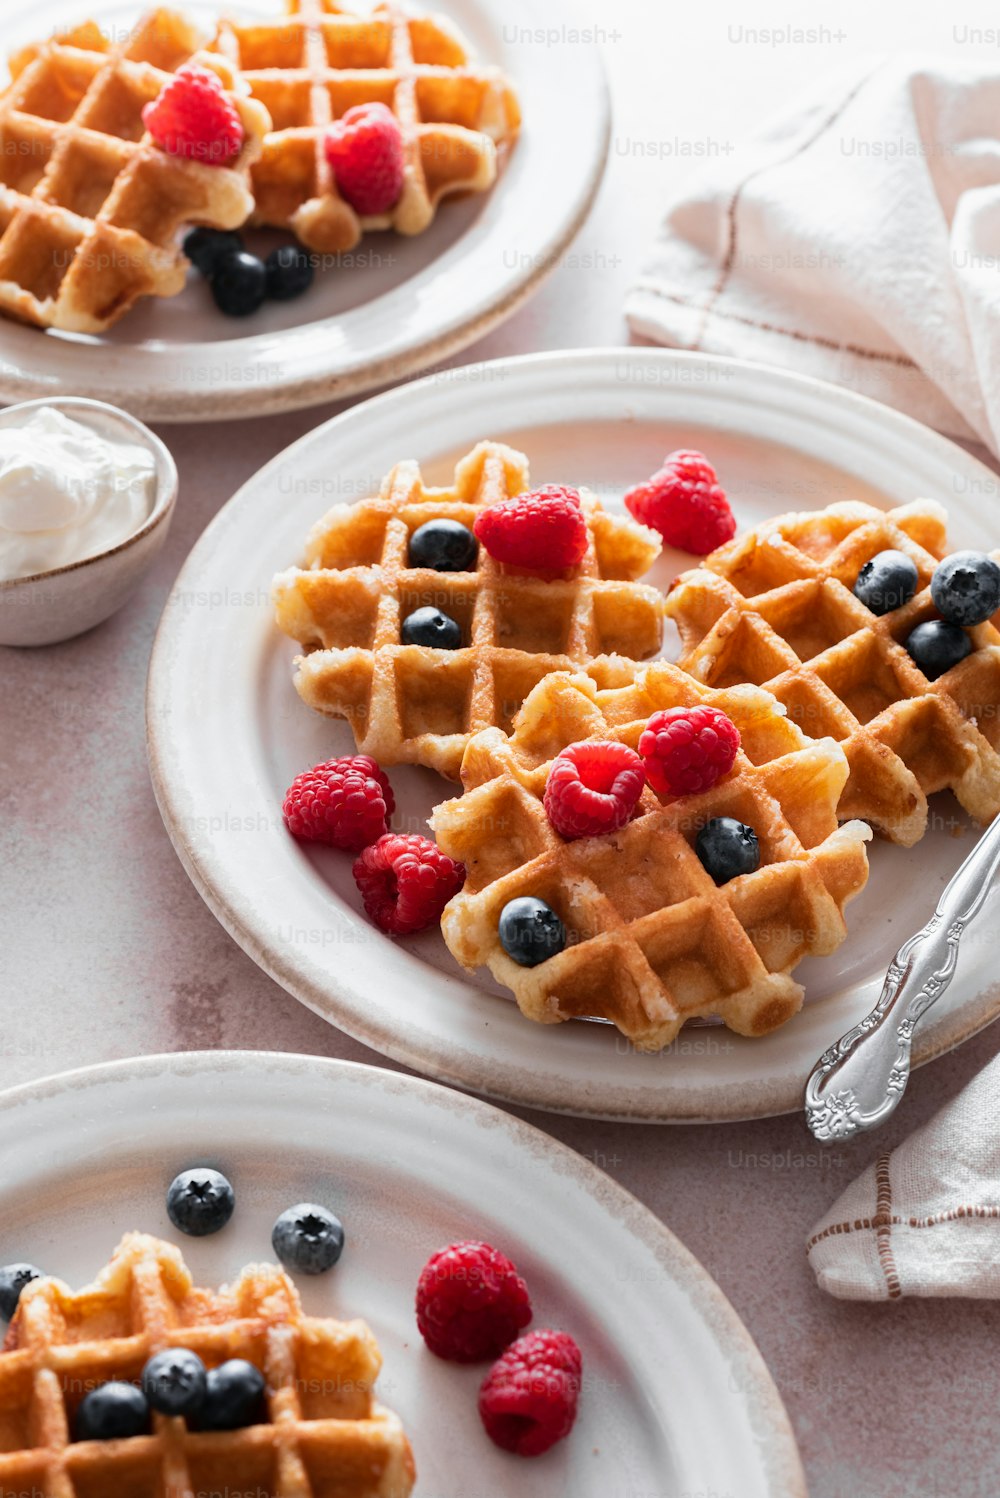 a plate of waffles with berries and blueberries